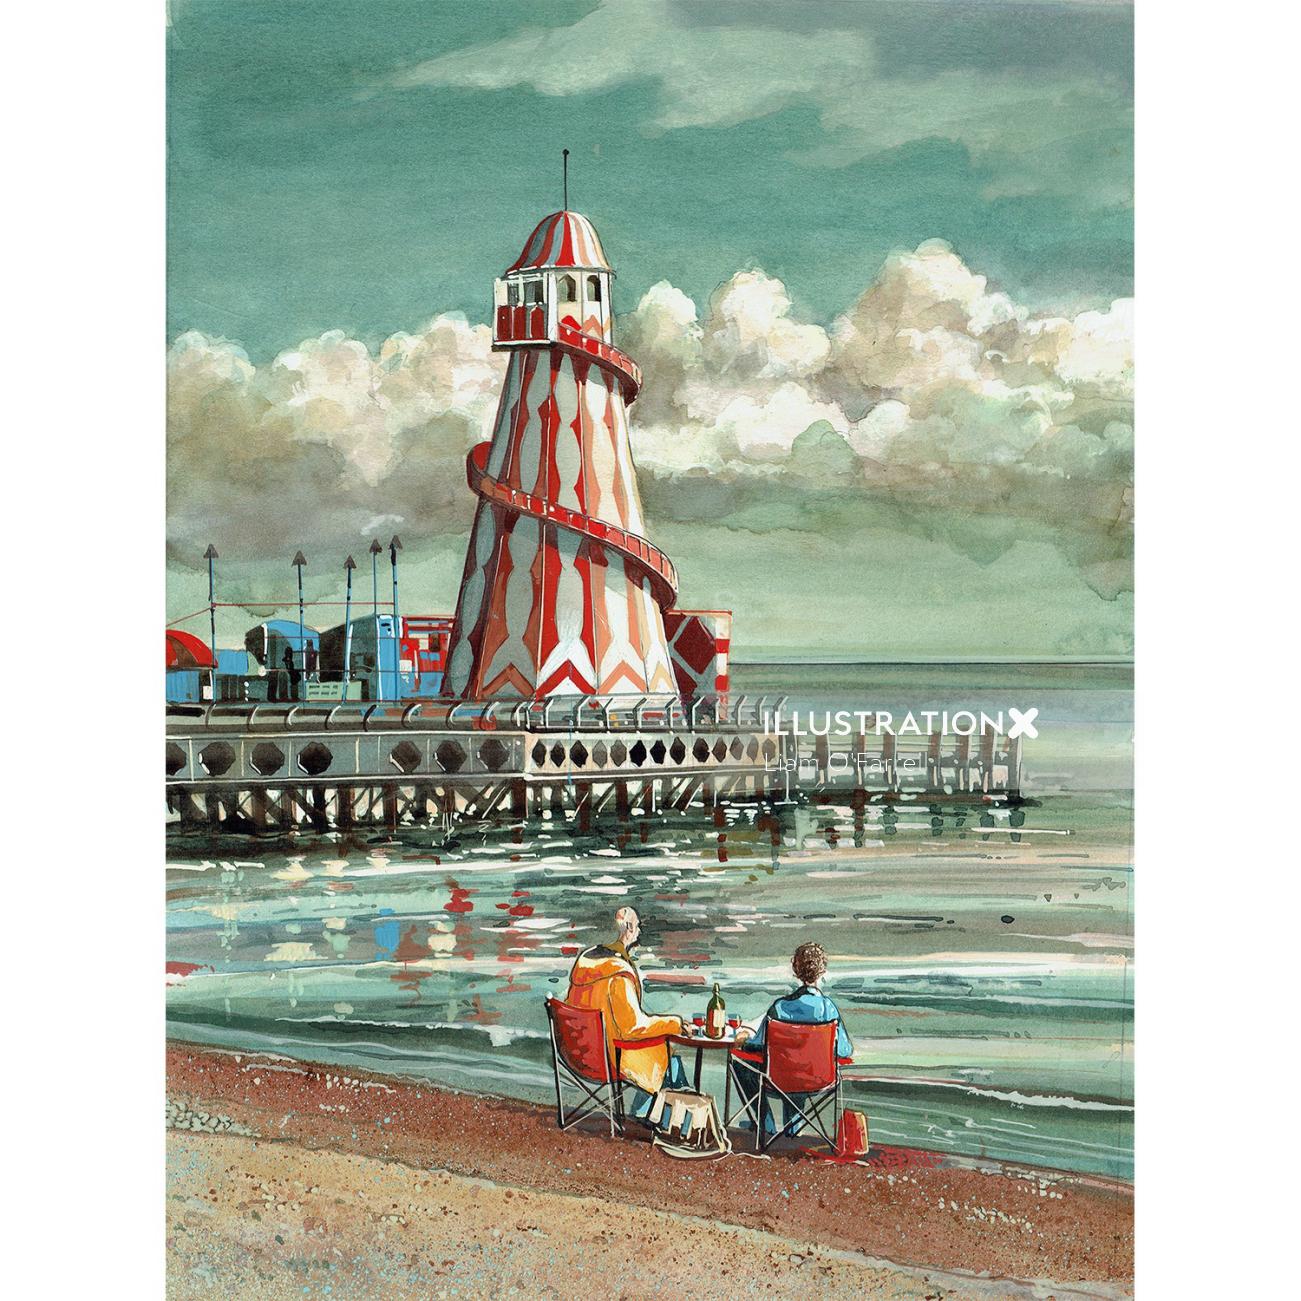 Red and white Helter skelter painting